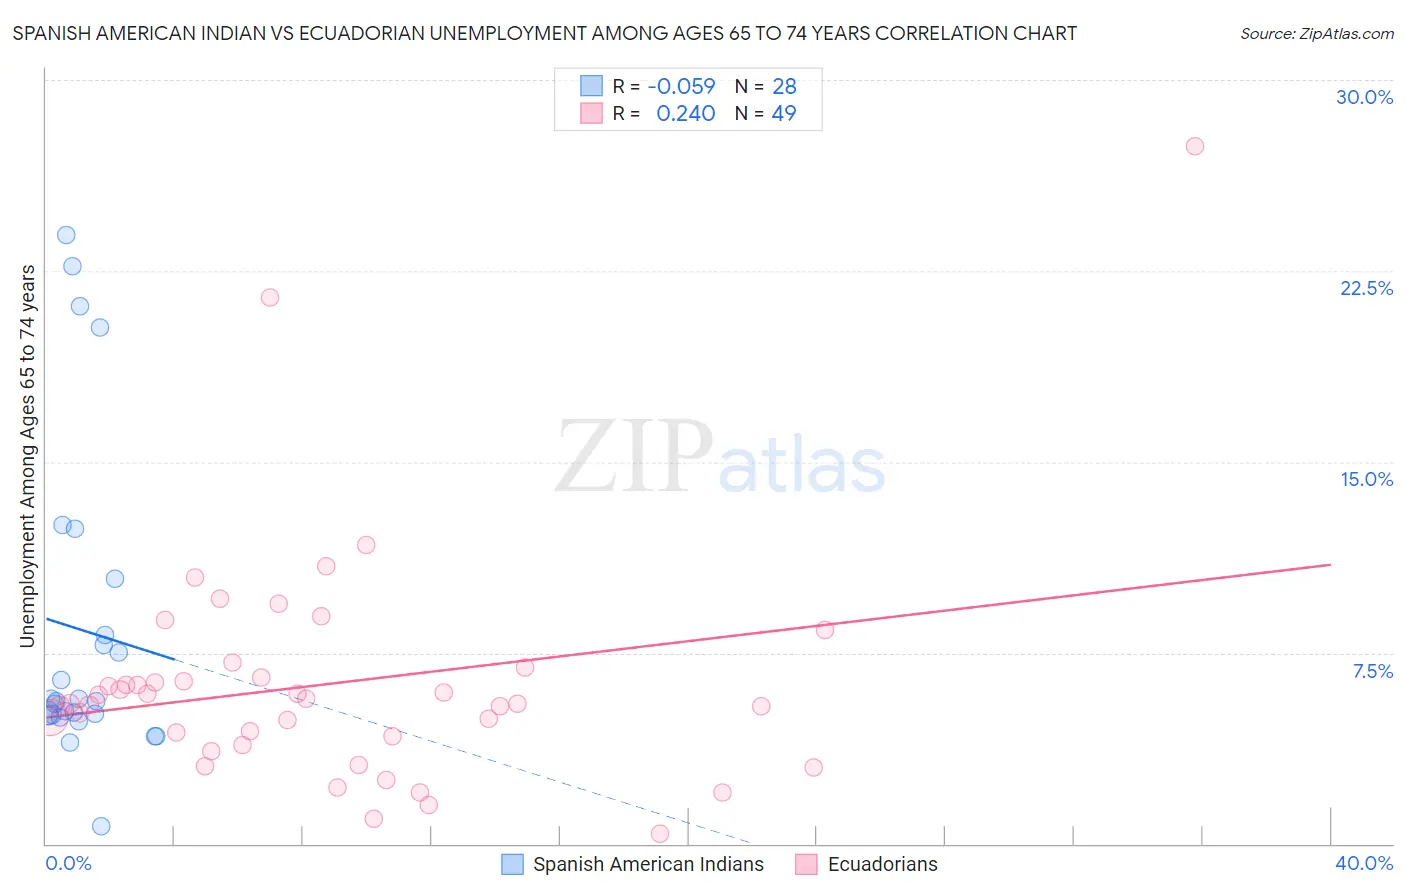 Spanish American Indian vs Ecuadorian Unemployment Among Ages 65 to 74 years